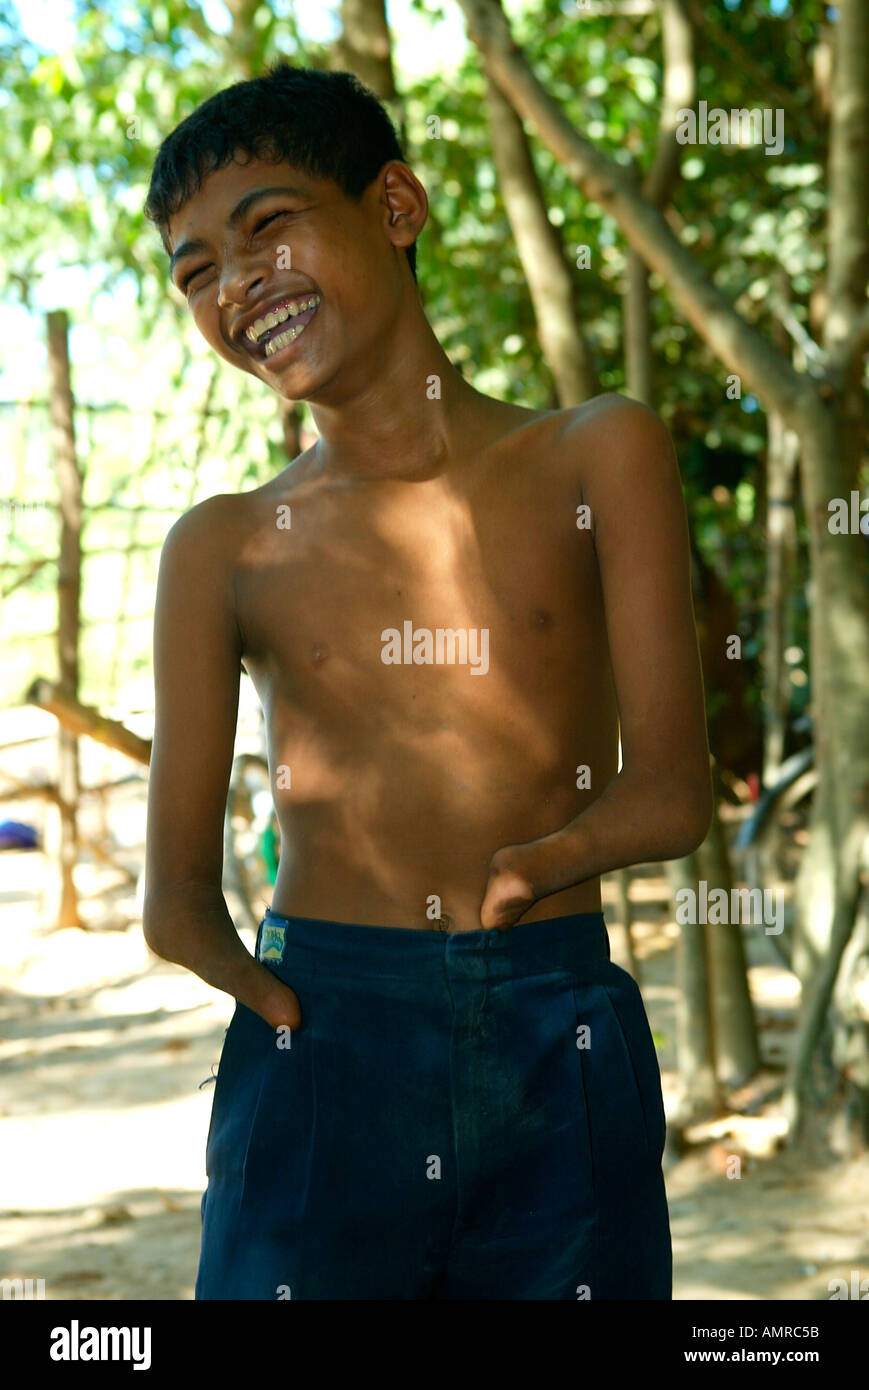 Landmine blast victim aged 12 laughing although he has lost his hands ...